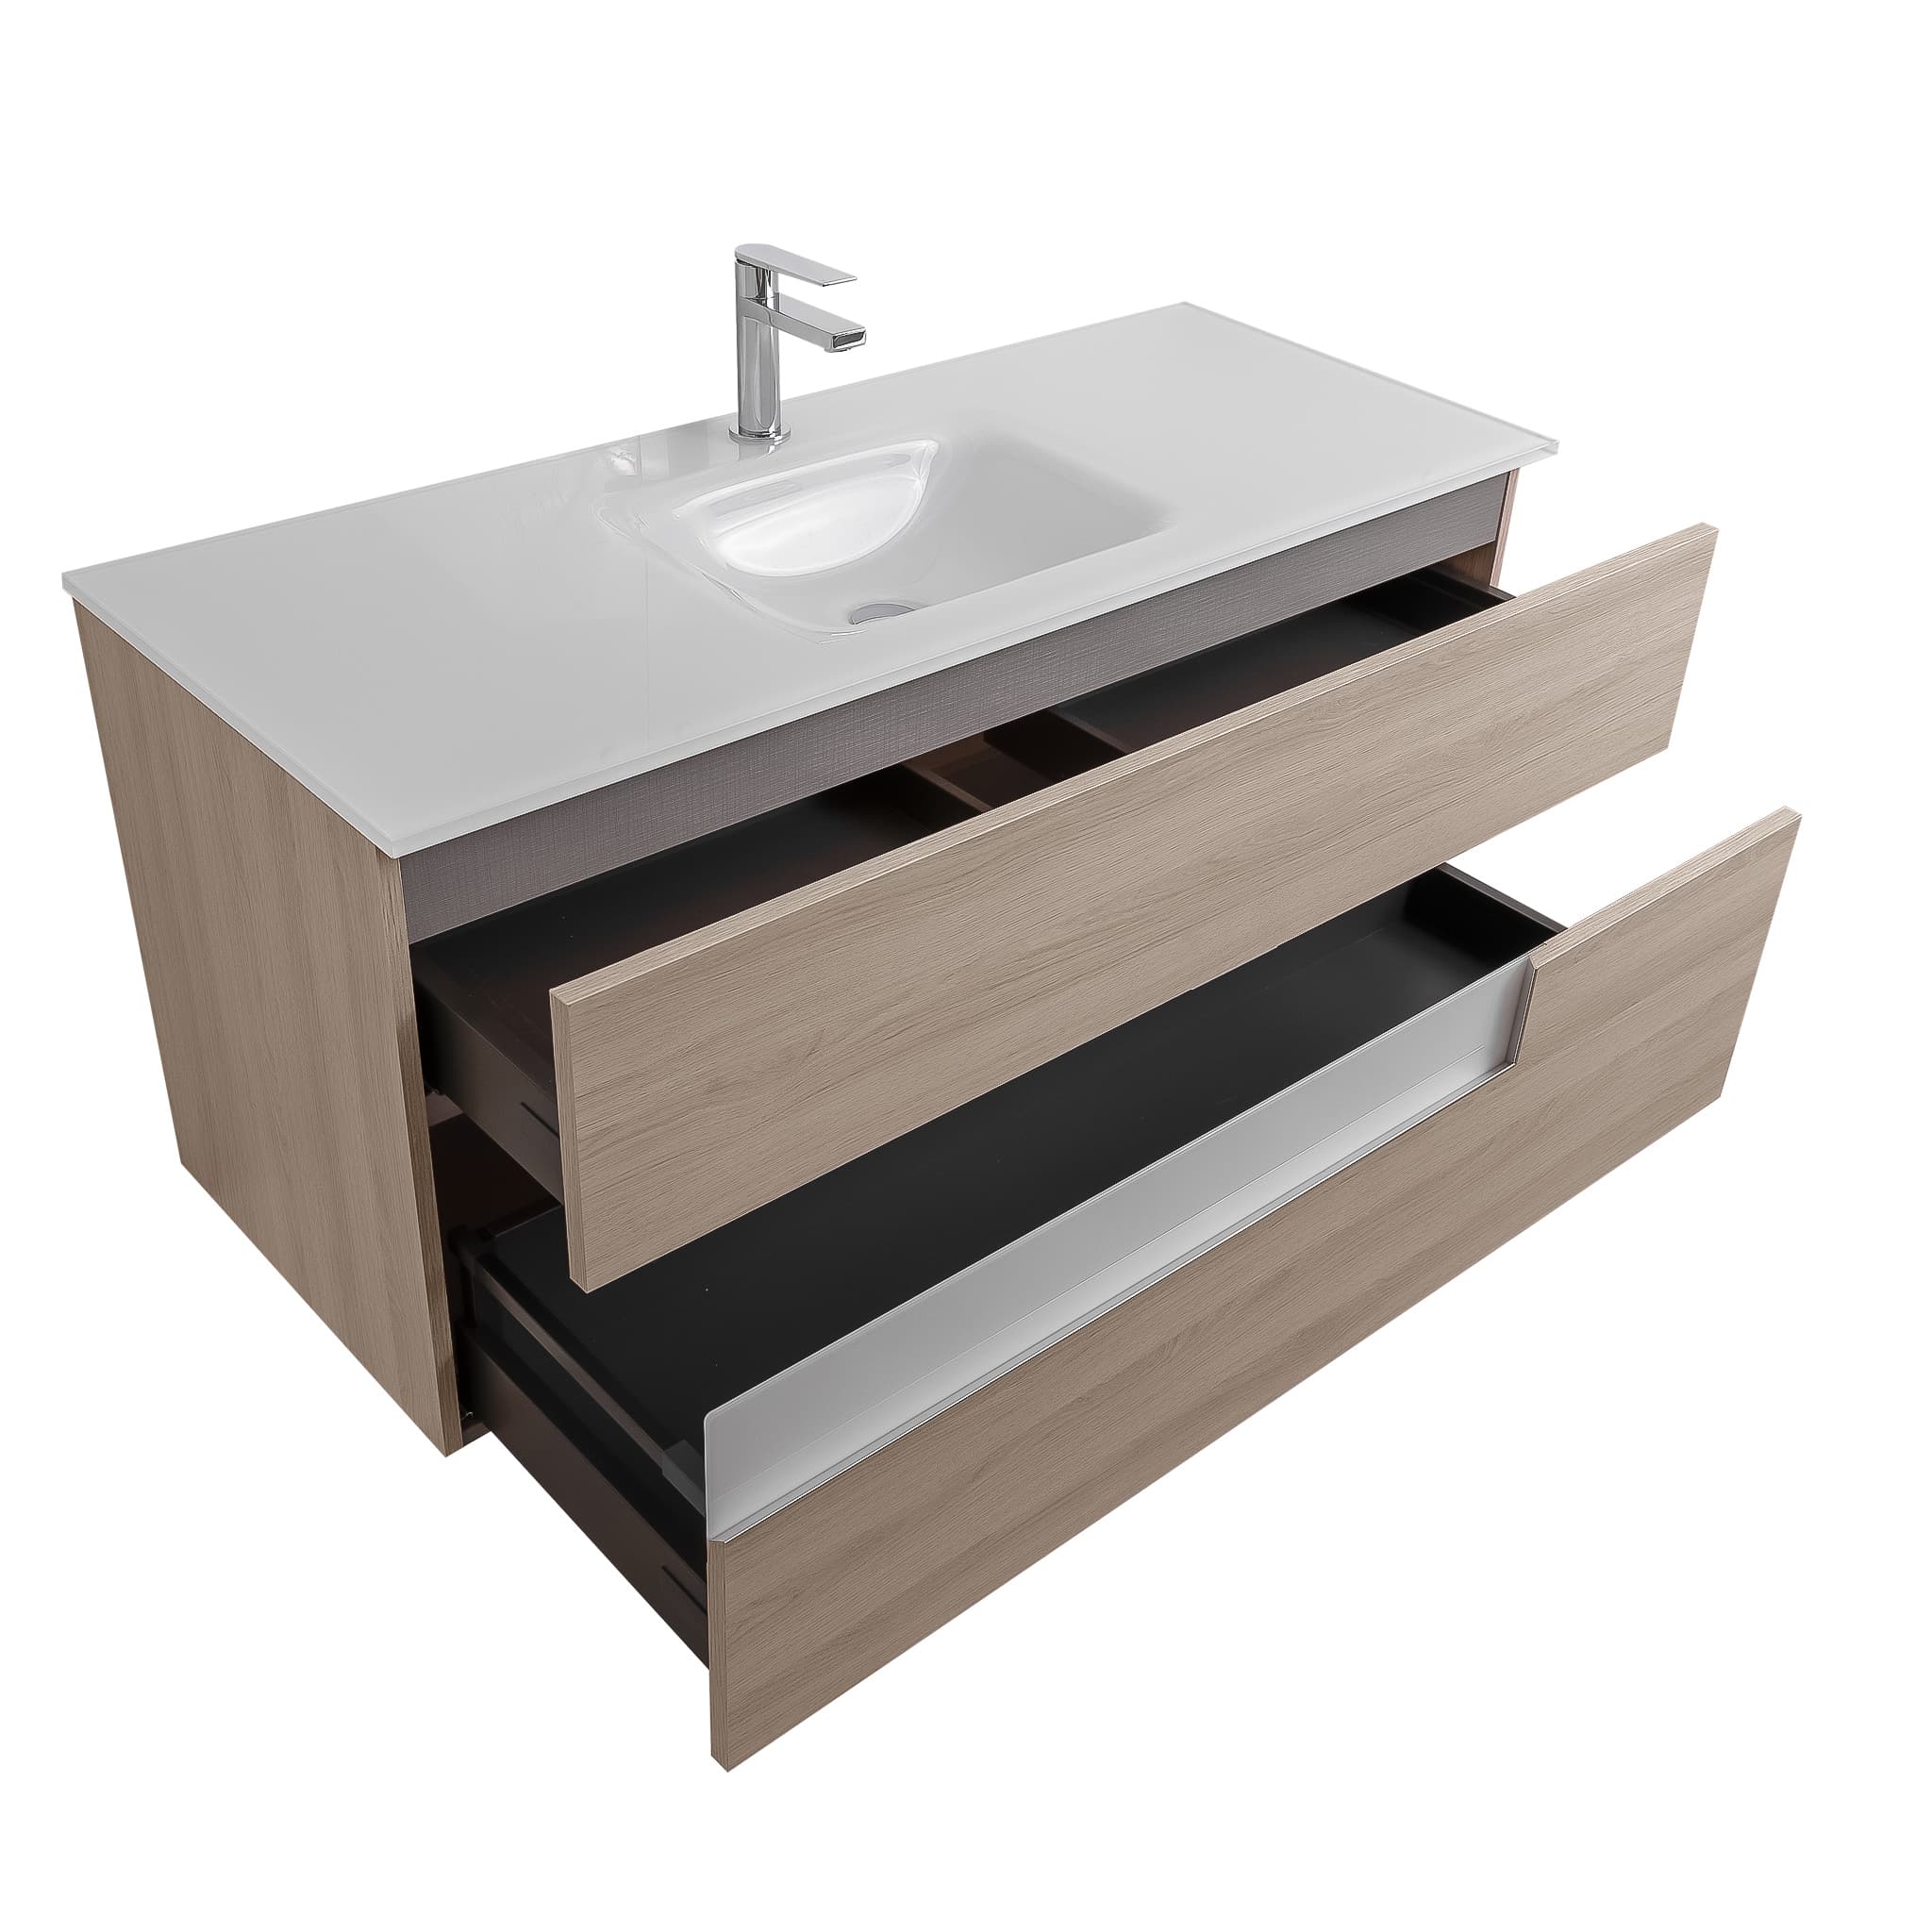 Vision 47.5 Natural Light  Wood Cabinet, White Tempered Glass Sink, Wall Mounted Modern Vanity Set